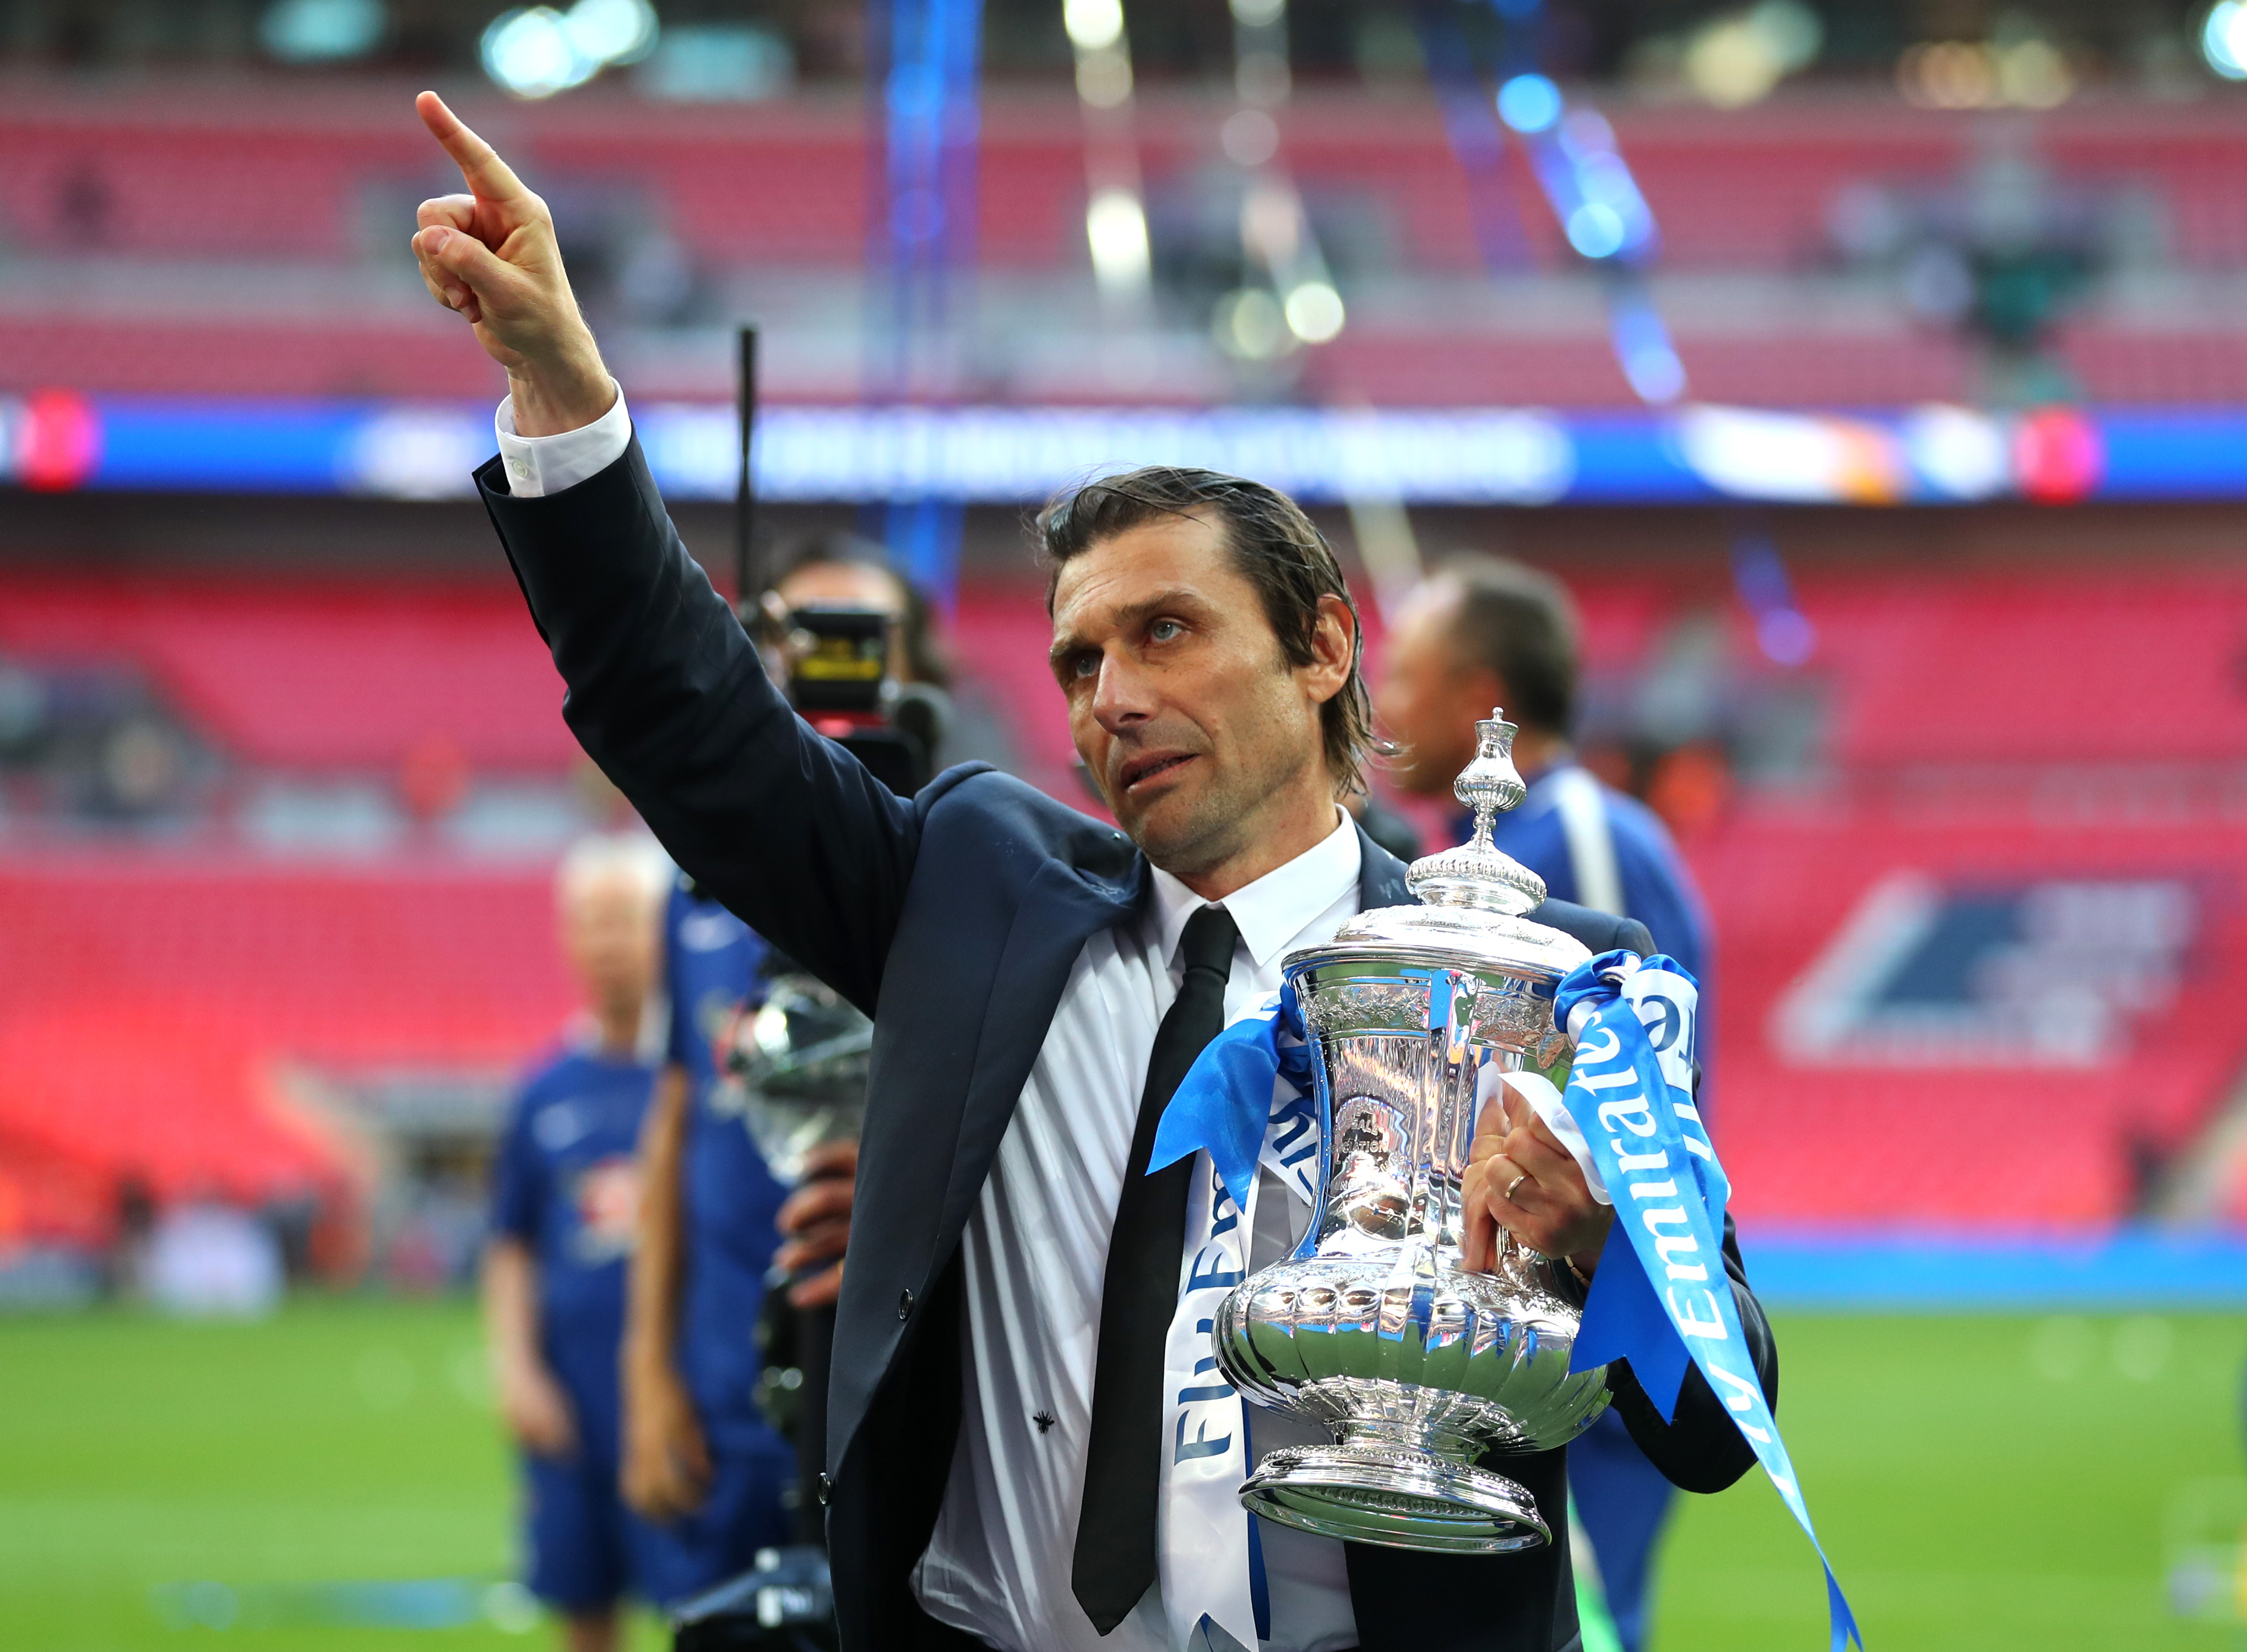 LONDON, ENGLAND - MAY 19:  Antonio Conte, Manager of Chelsea celebrates with the Emirates FA Cup Trophy following his sides victory in The Emirates FA Cup Final between Chelsea and Manchester United at Wembley Stadium on May 19, 2018 in London, England.  (Photo by Catherine Ivill/Getty Images)